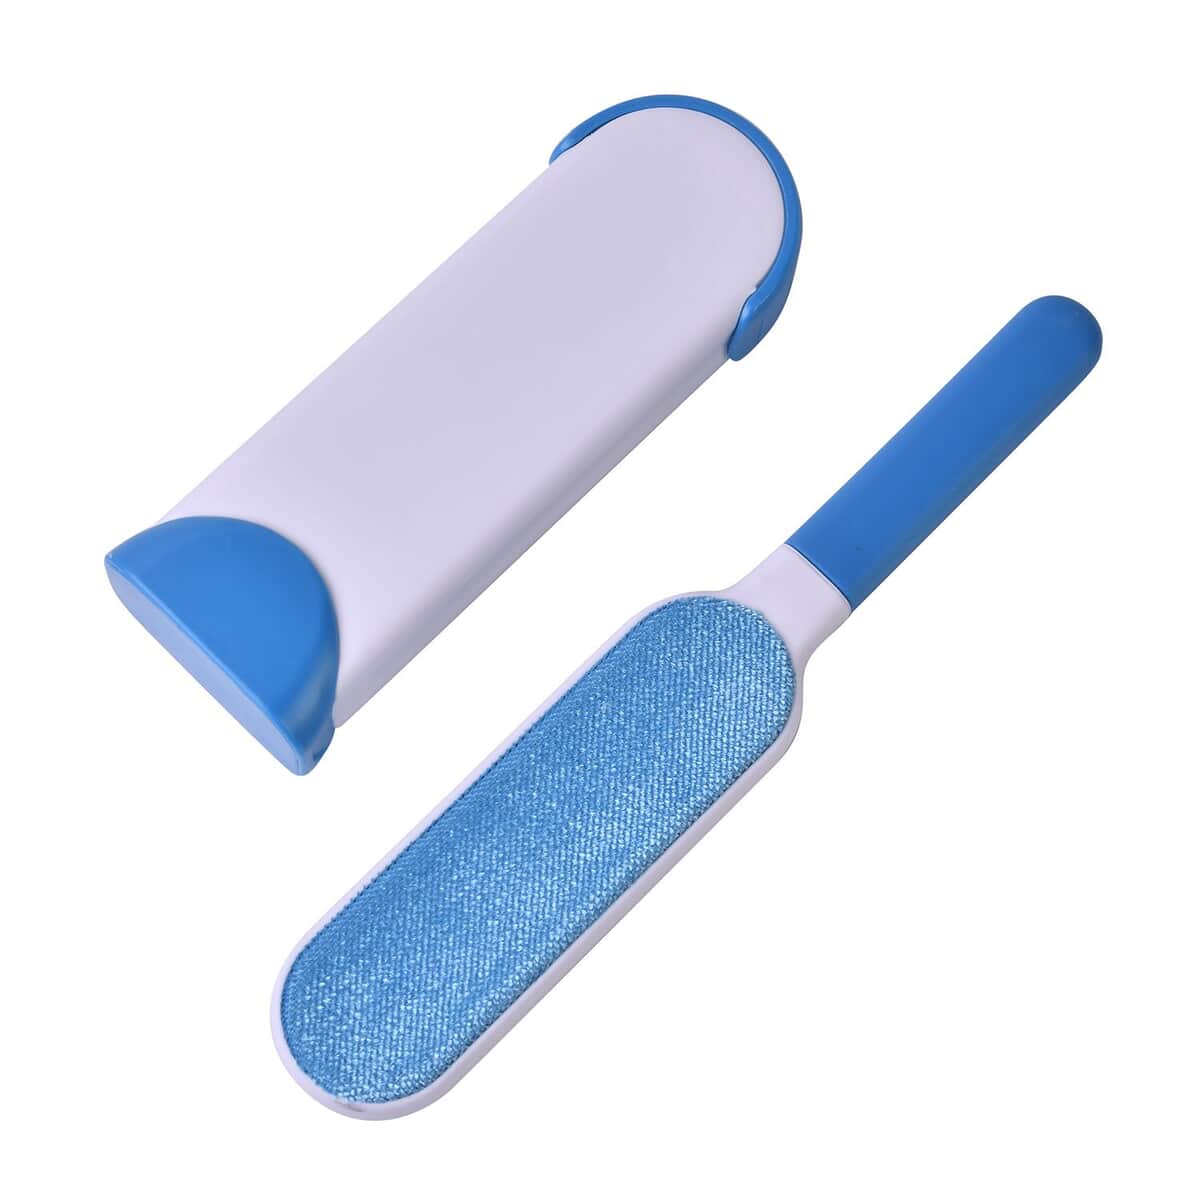 Set of 2 Blue Double Sided Cleaning Brush (3.54"x1.57"x12.6") & (2.16"x0.98"x5.51") image number 2